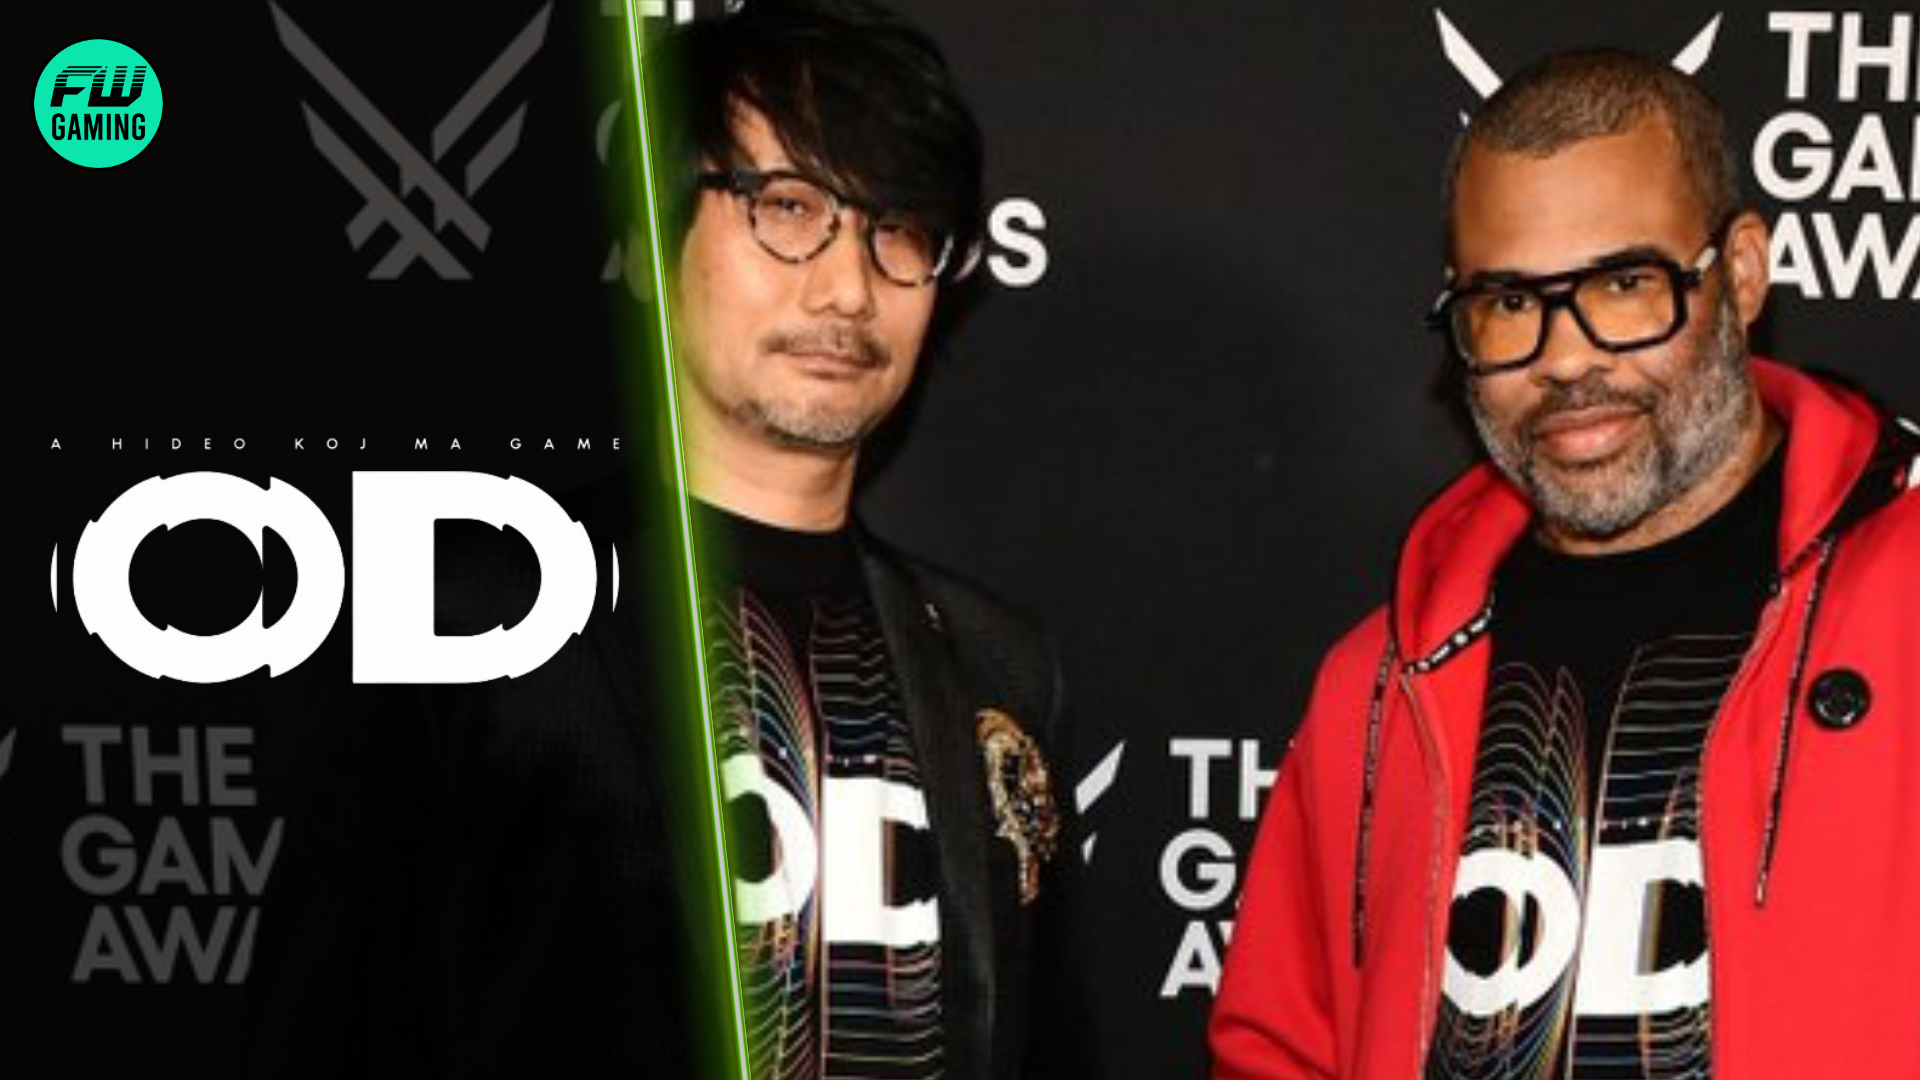 Hideo Kojima’s OD: Jordan Peele Isn't the Only Creative That the Auteur Is Collaborating With